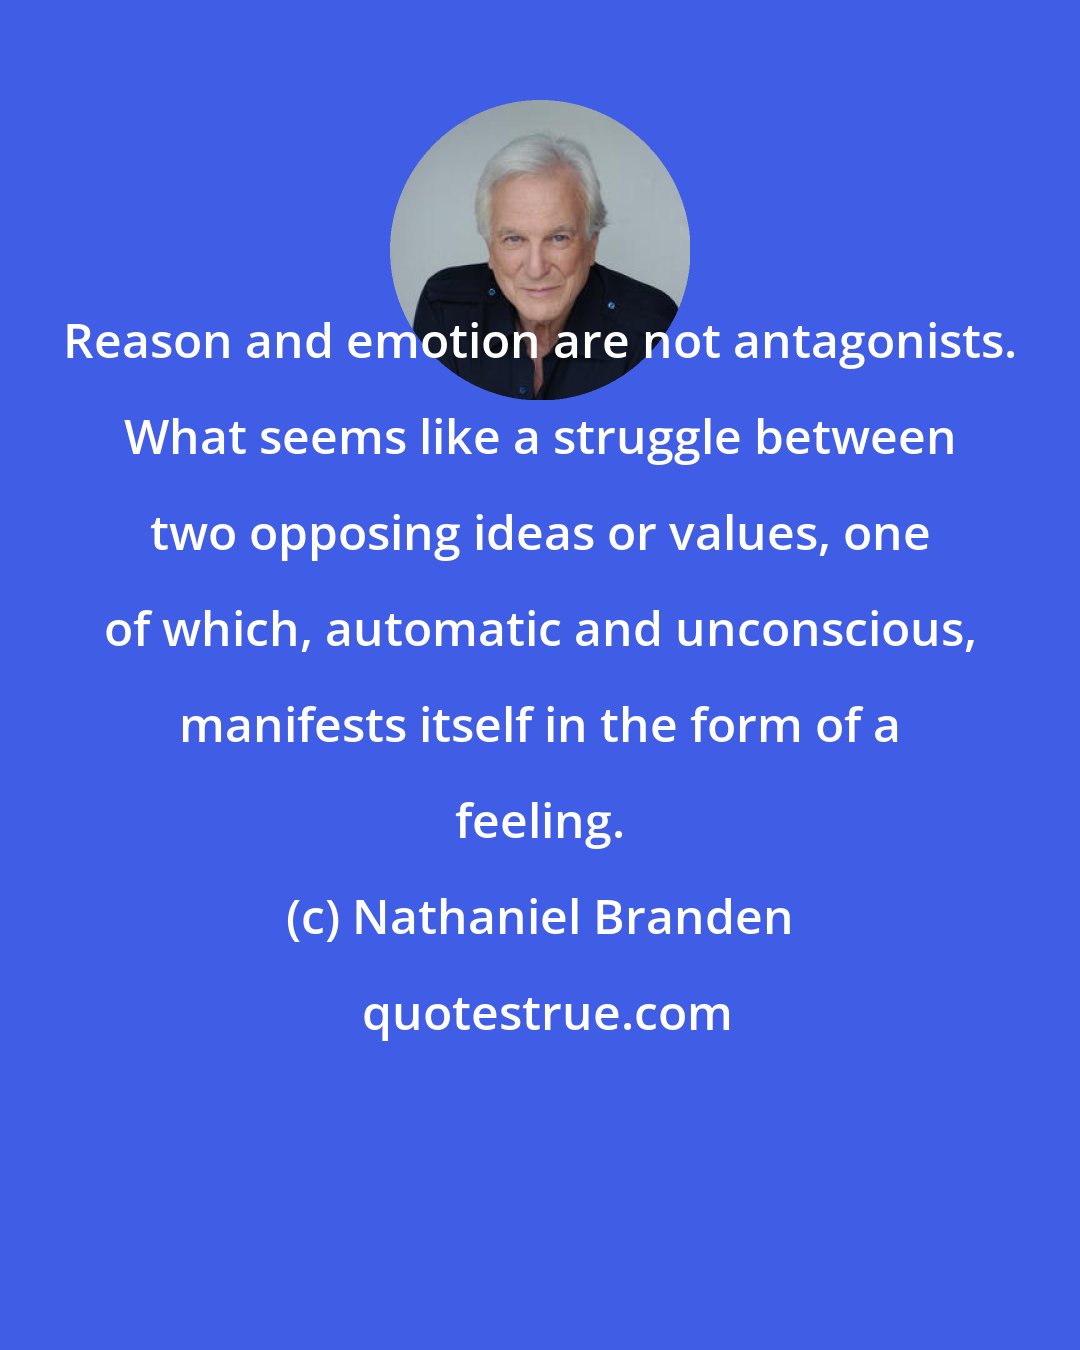 Nathaniel Branden: Reason and emotion are not antagonists. What seems like a struggle between two opposing ideas or values, one of which, automatic and unconscious, manifests itself in the form of a feeling.